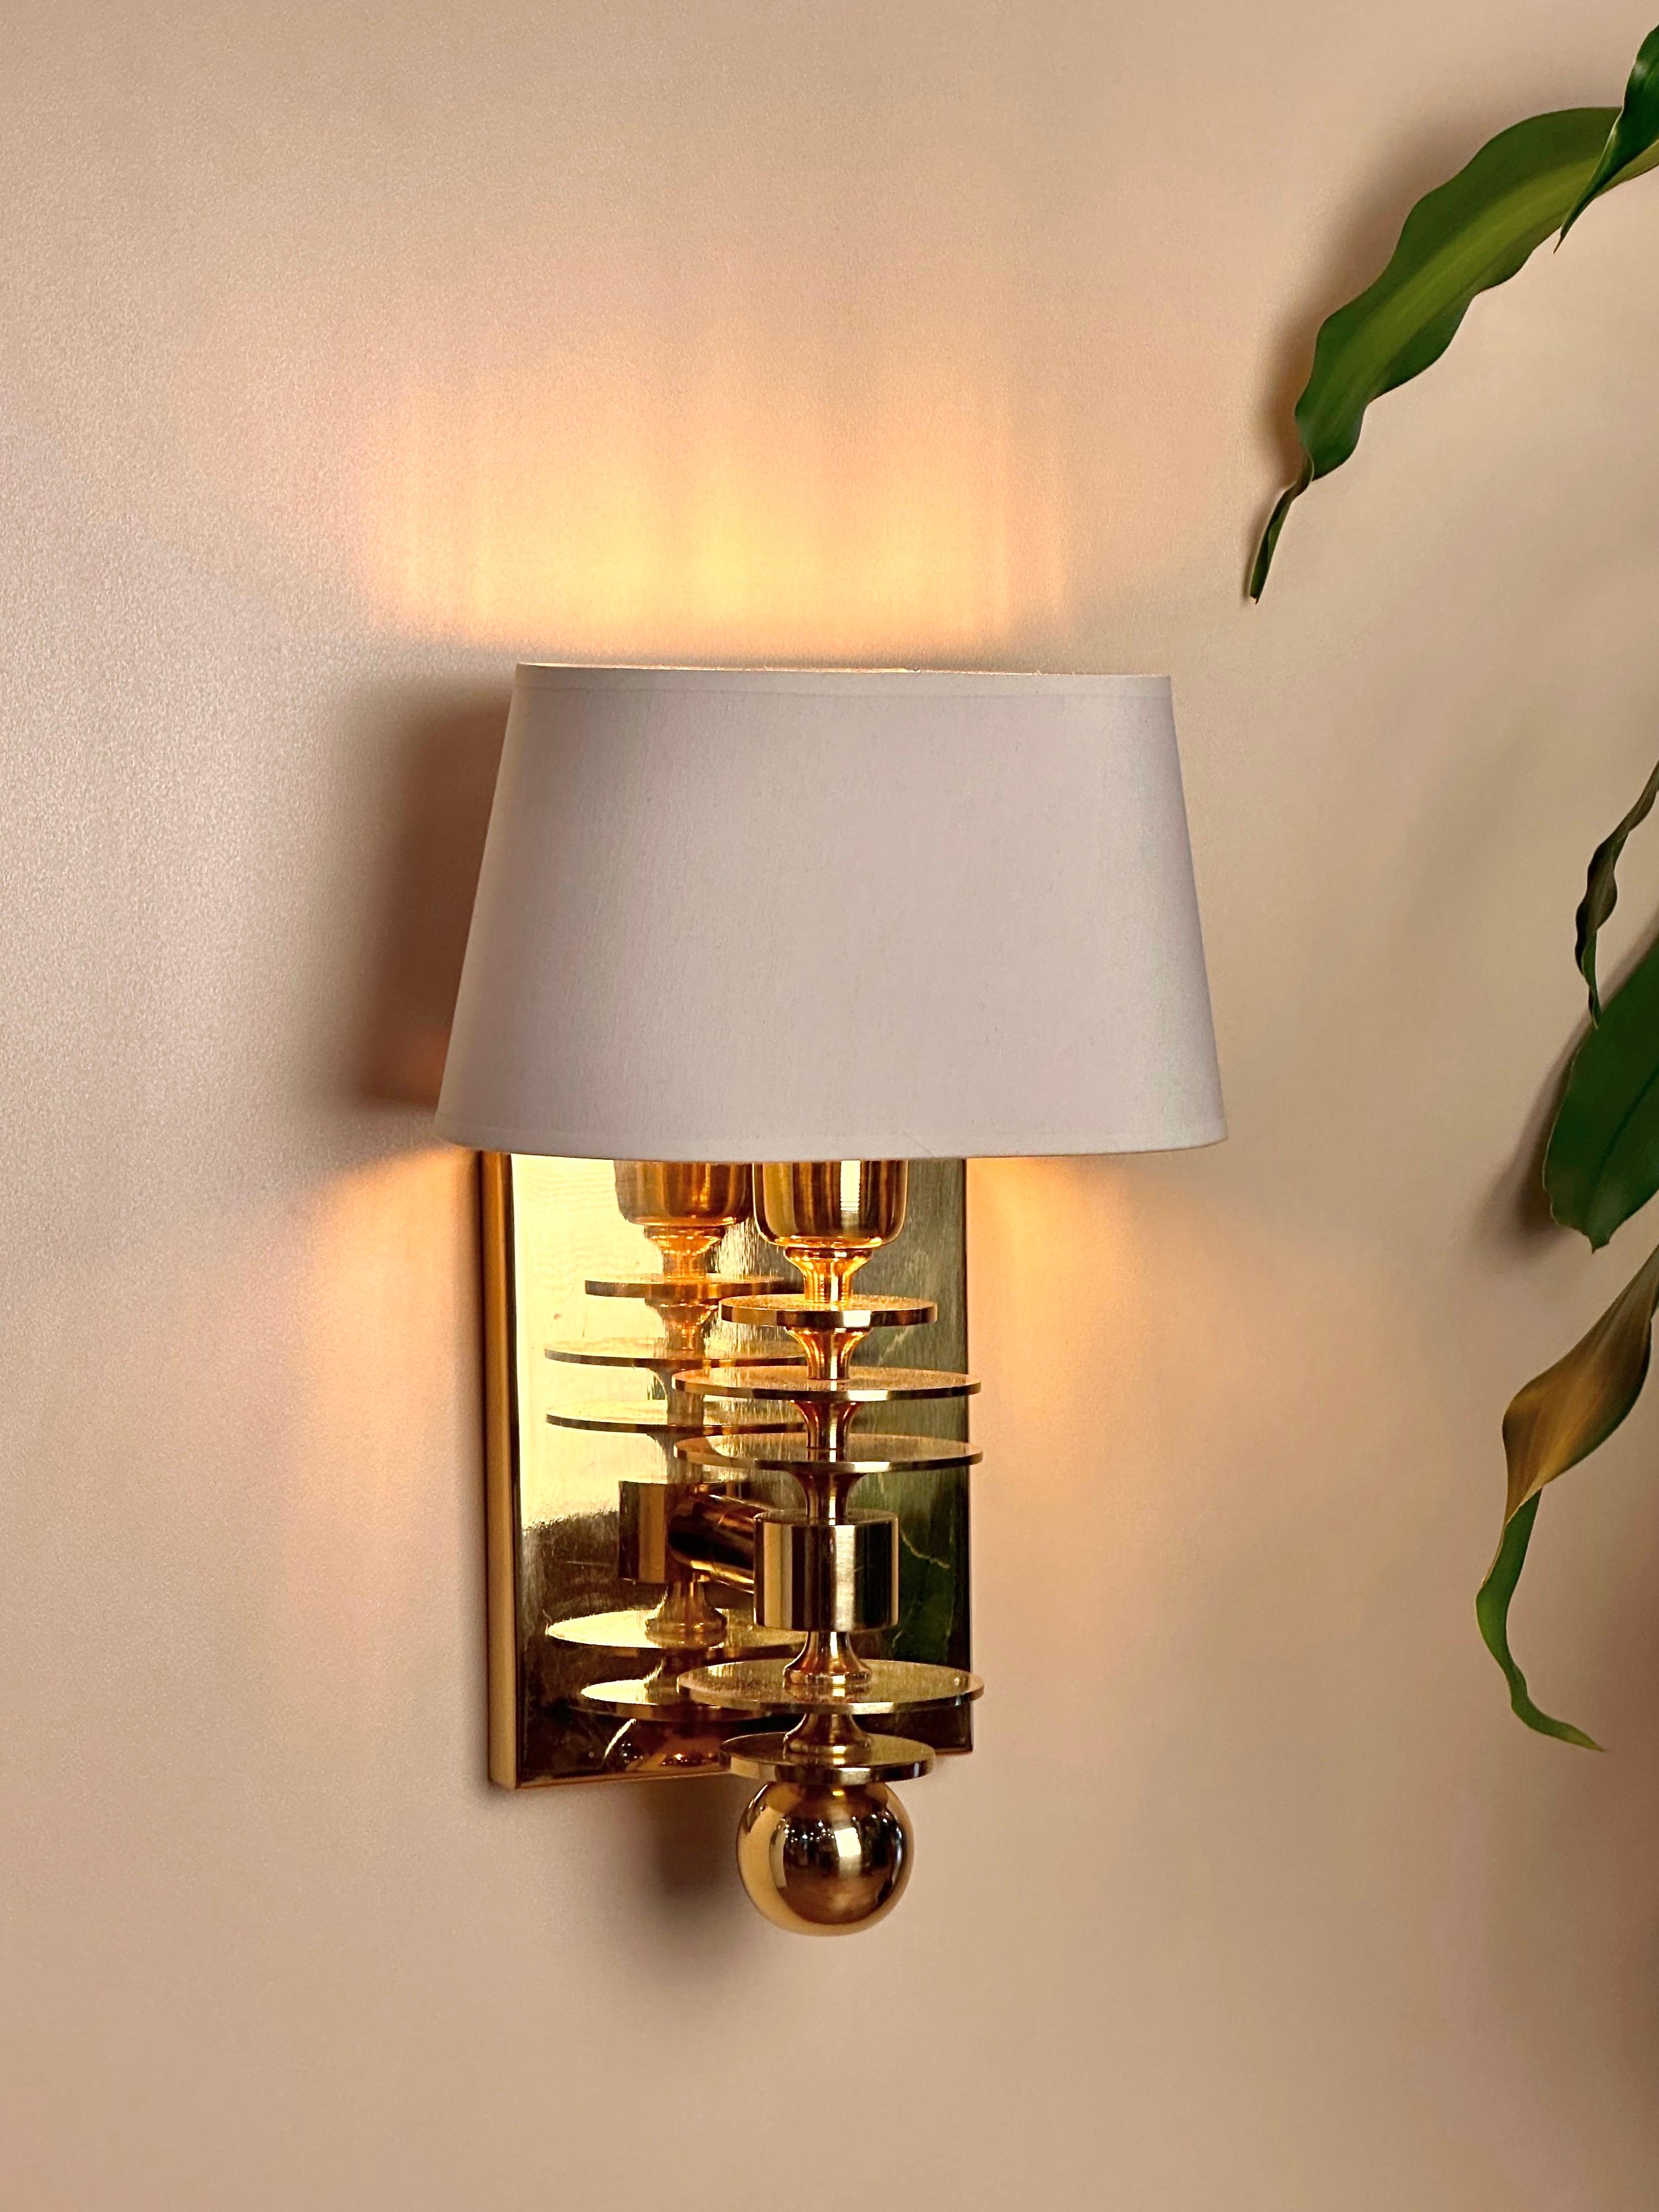 Marsala Shade Brass Wall Sconce Mid-Century Modern Lighting In New Condition For Sale In İstiklal, TR